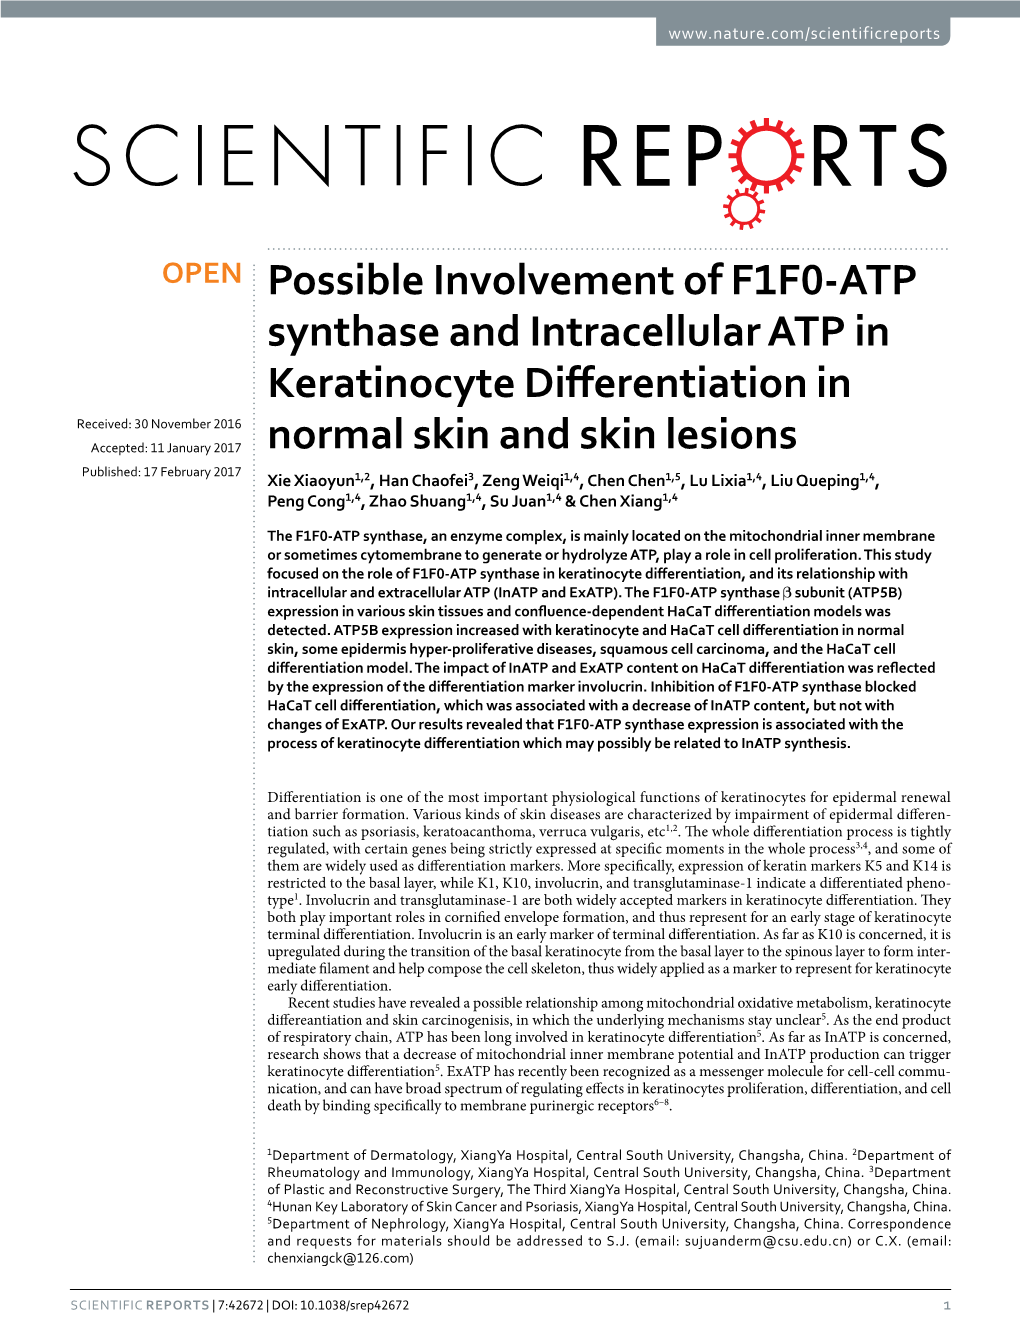 Possible Involvement of F1F0-ATP Synthase and Intracellular ATP In